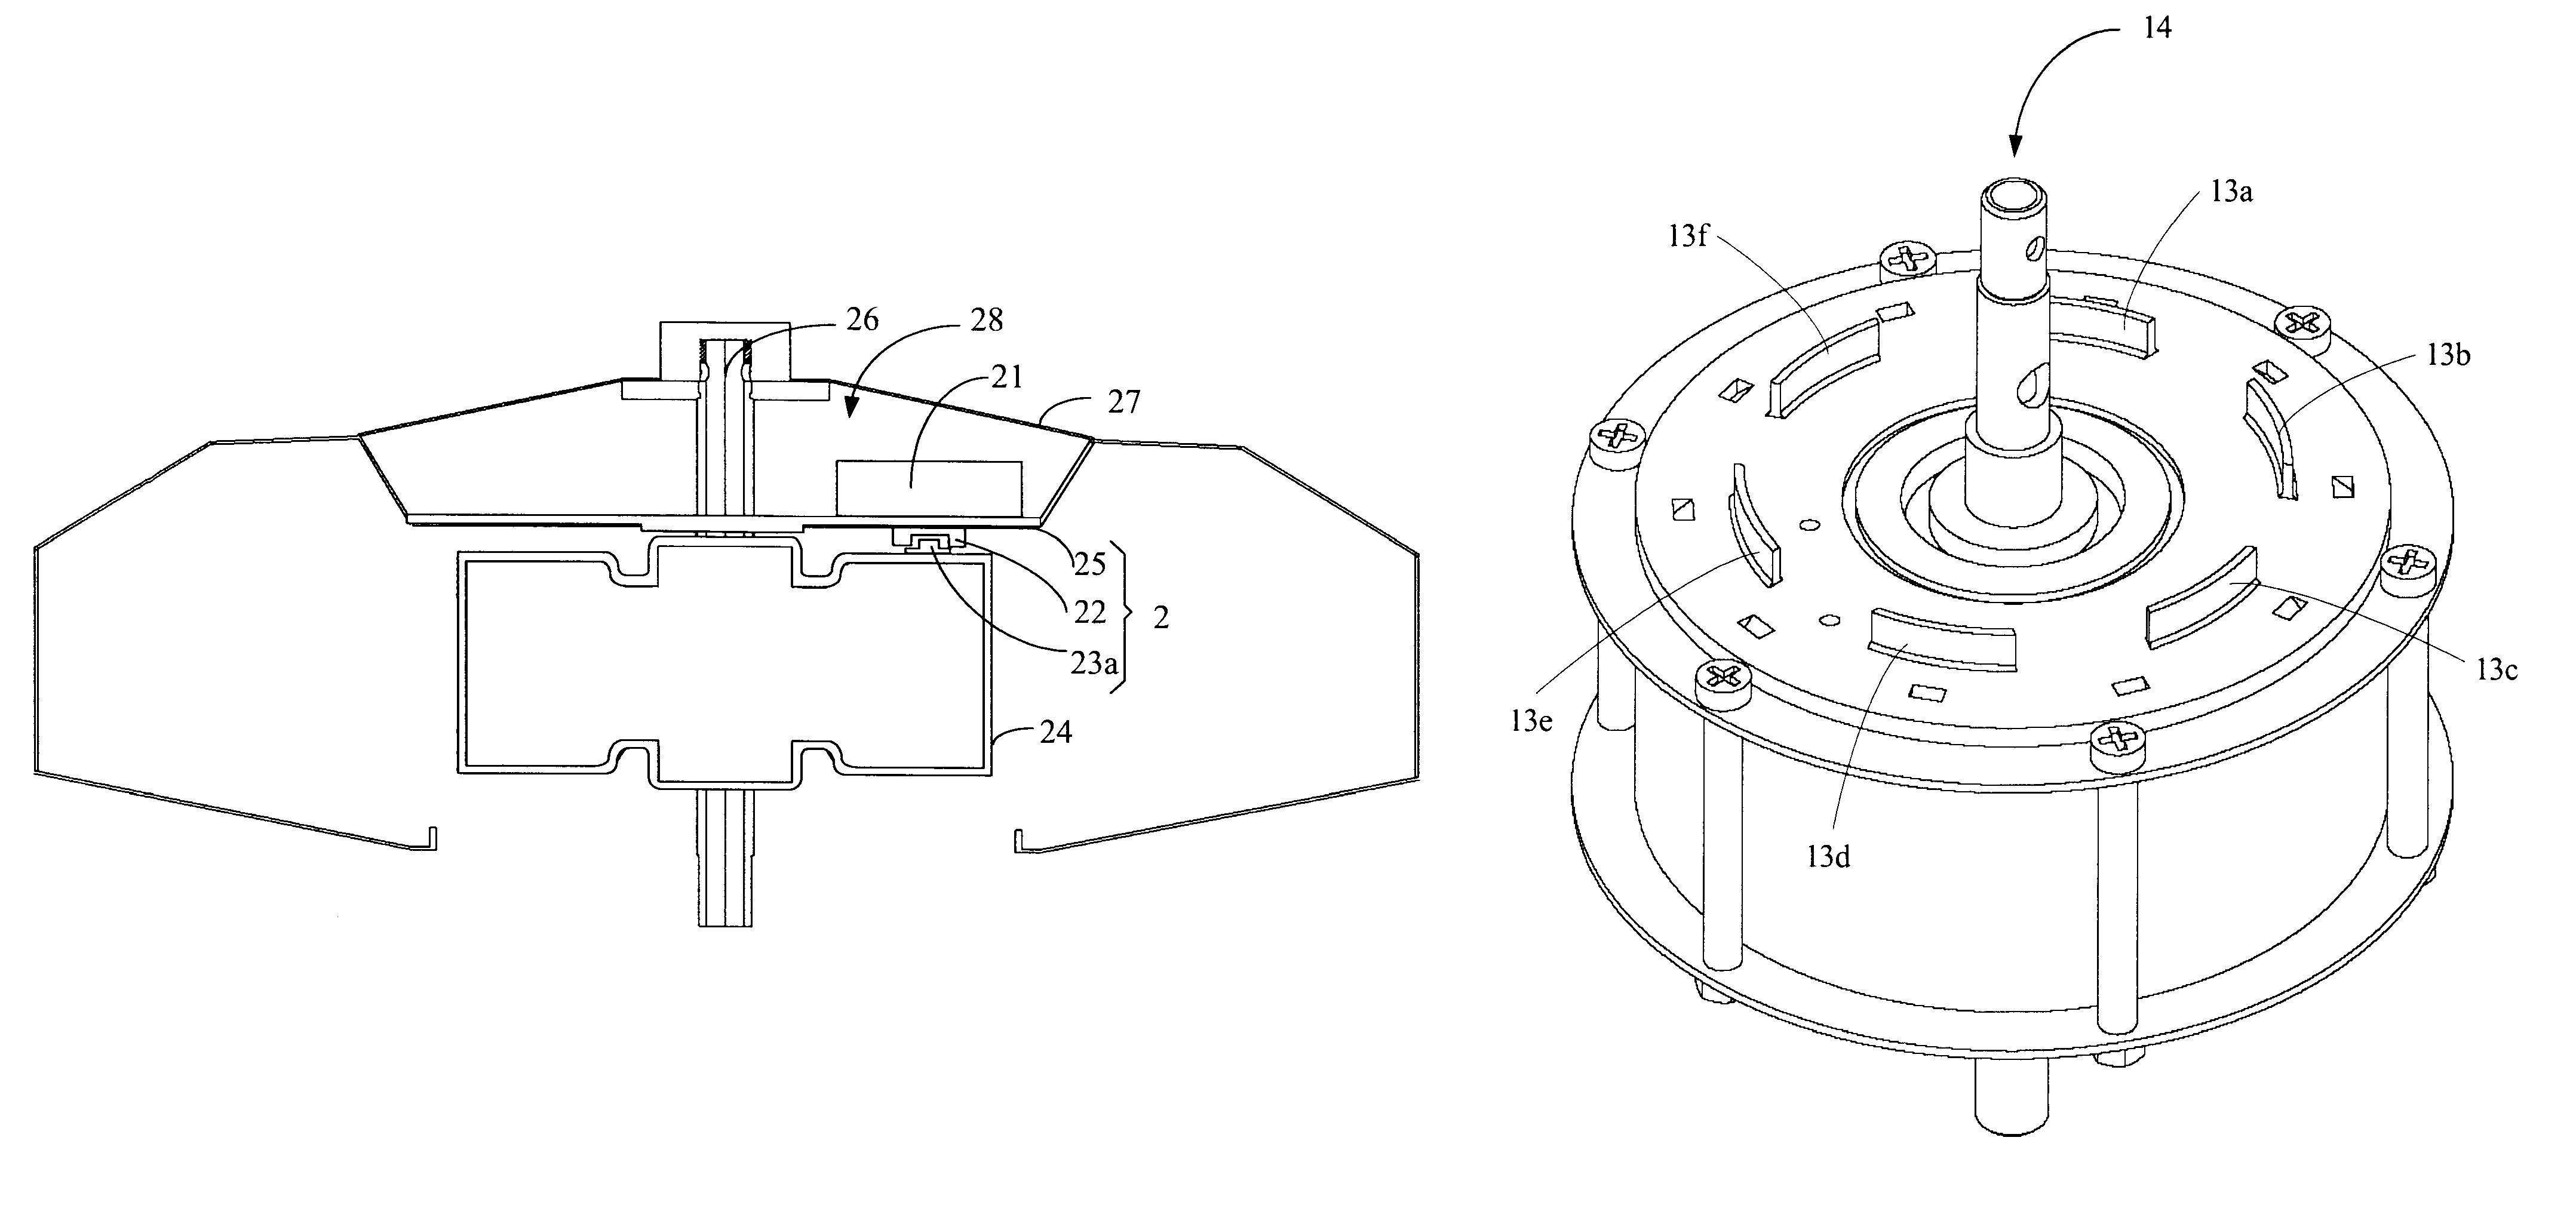 Driving apparatus for a ceiling fan